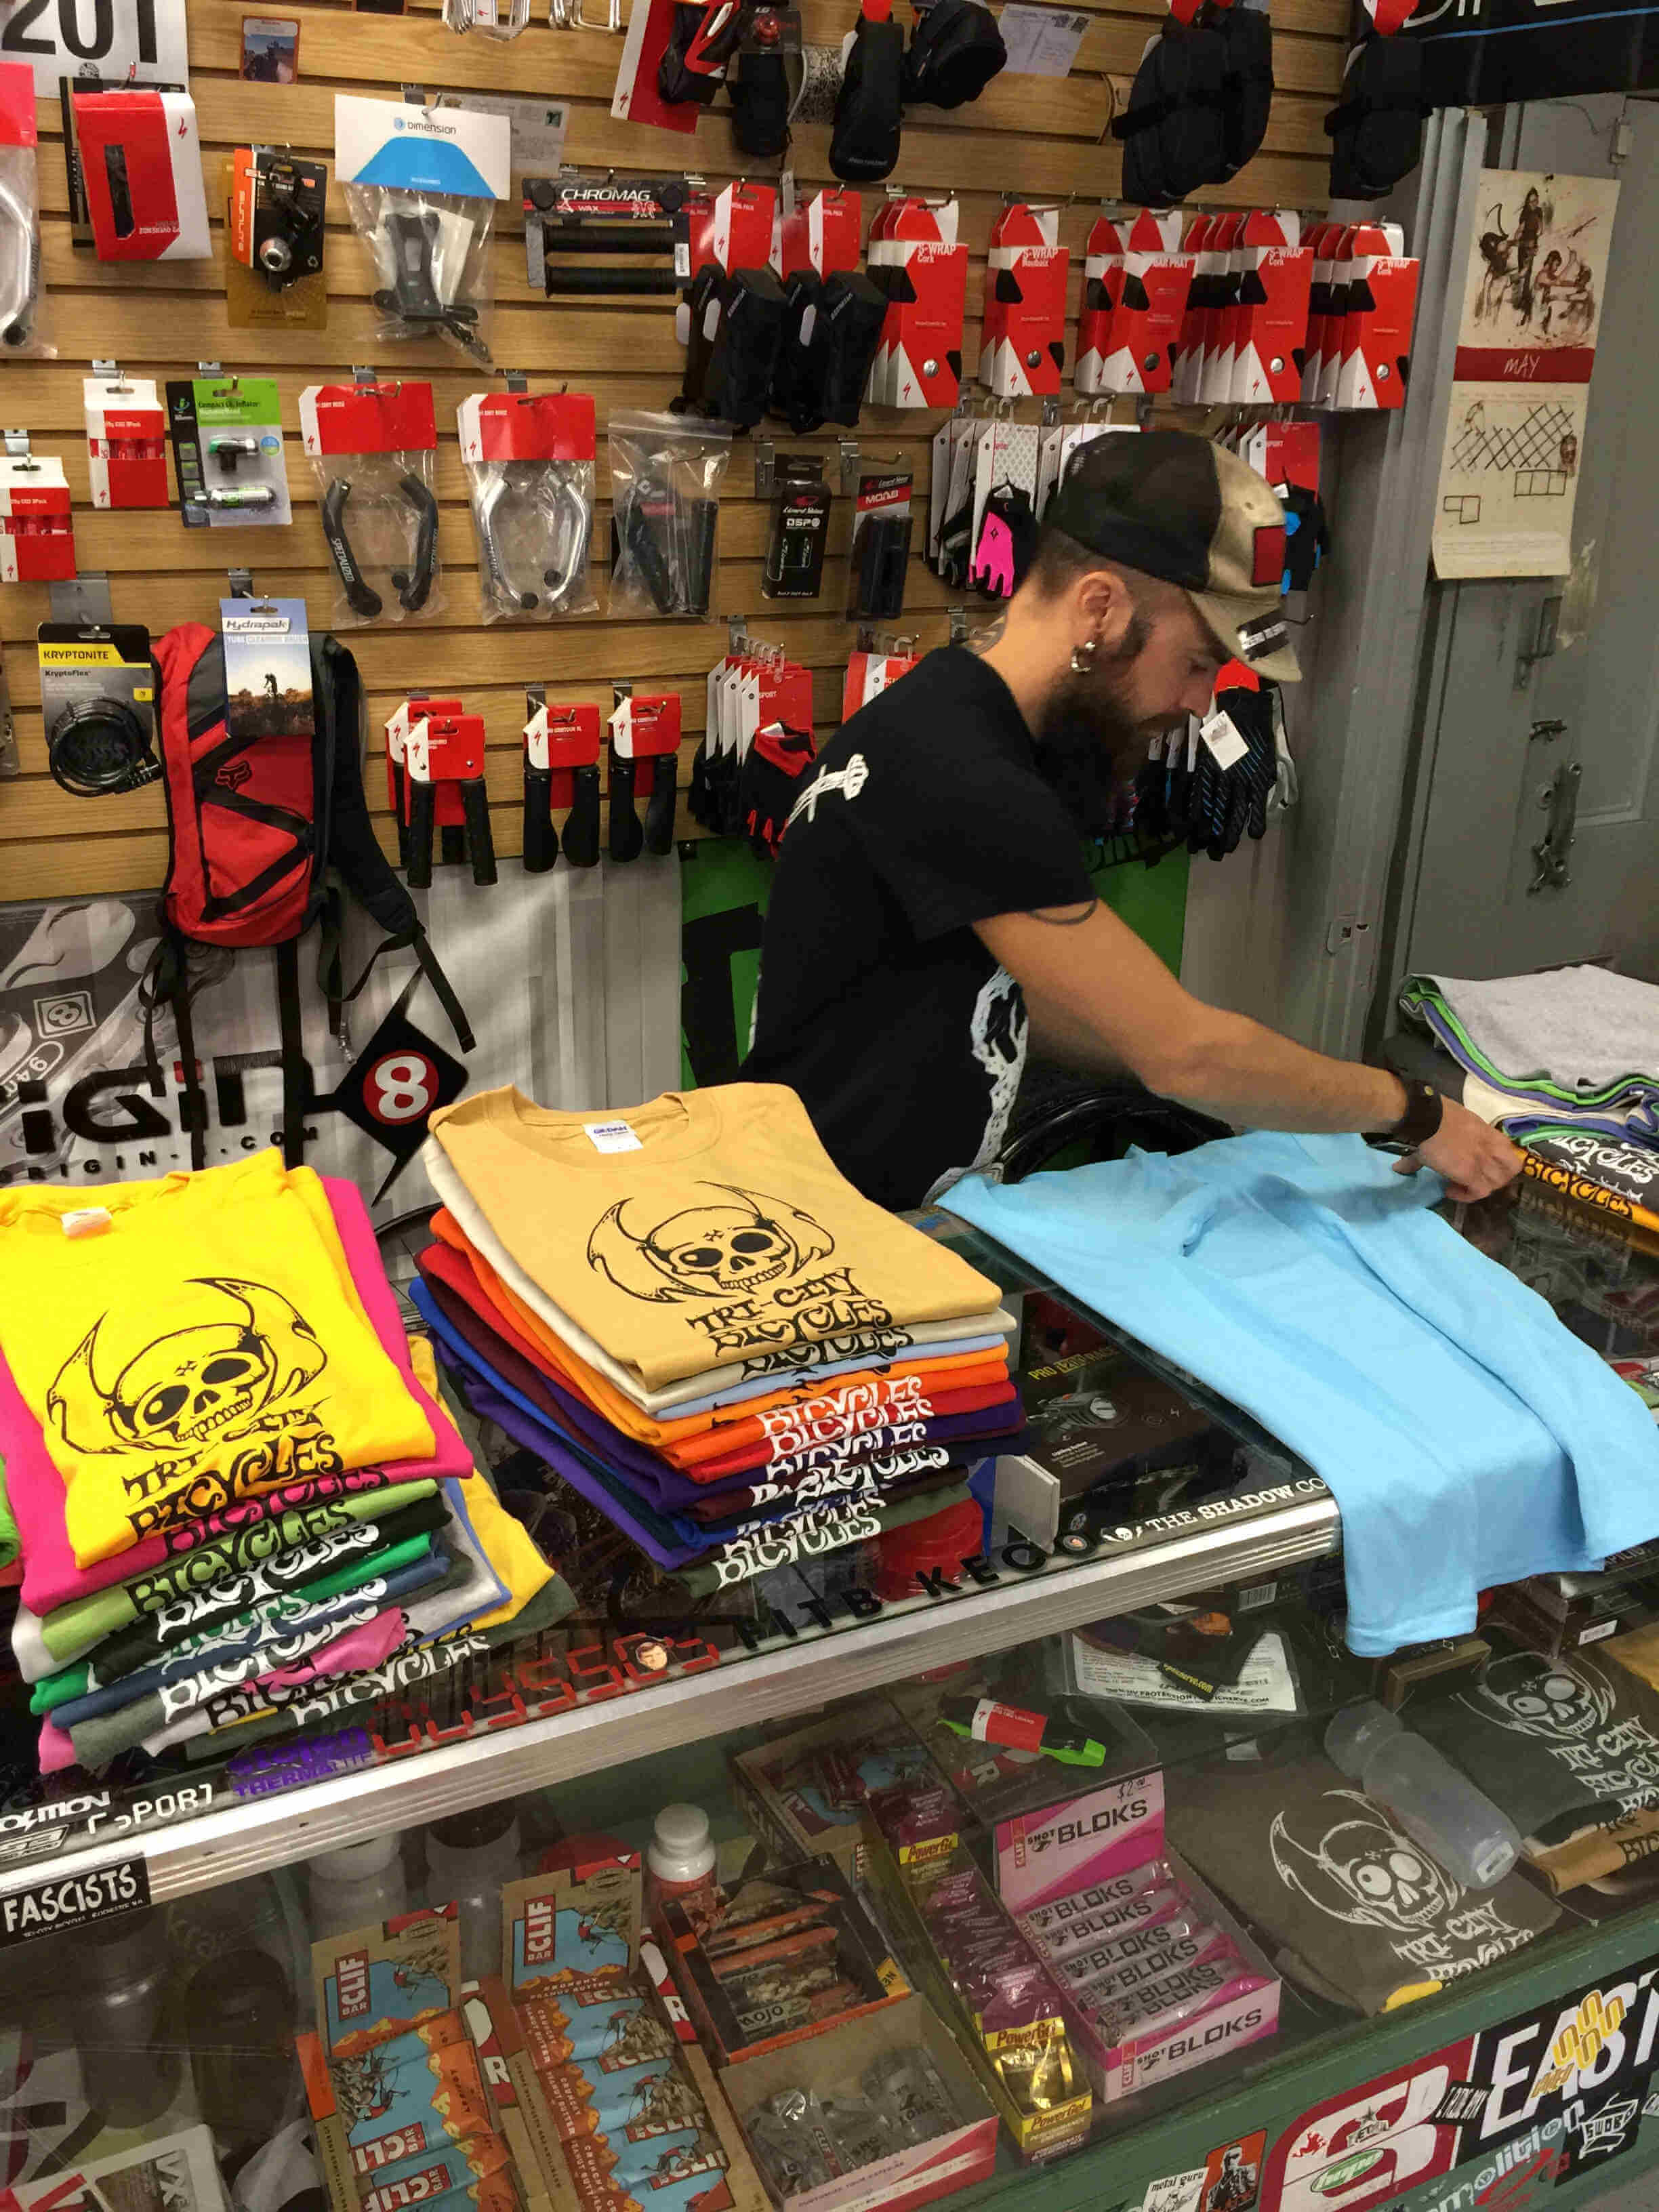 A person behind a service counter, folding t-shirts, with a wall of packaged bike parts behind them